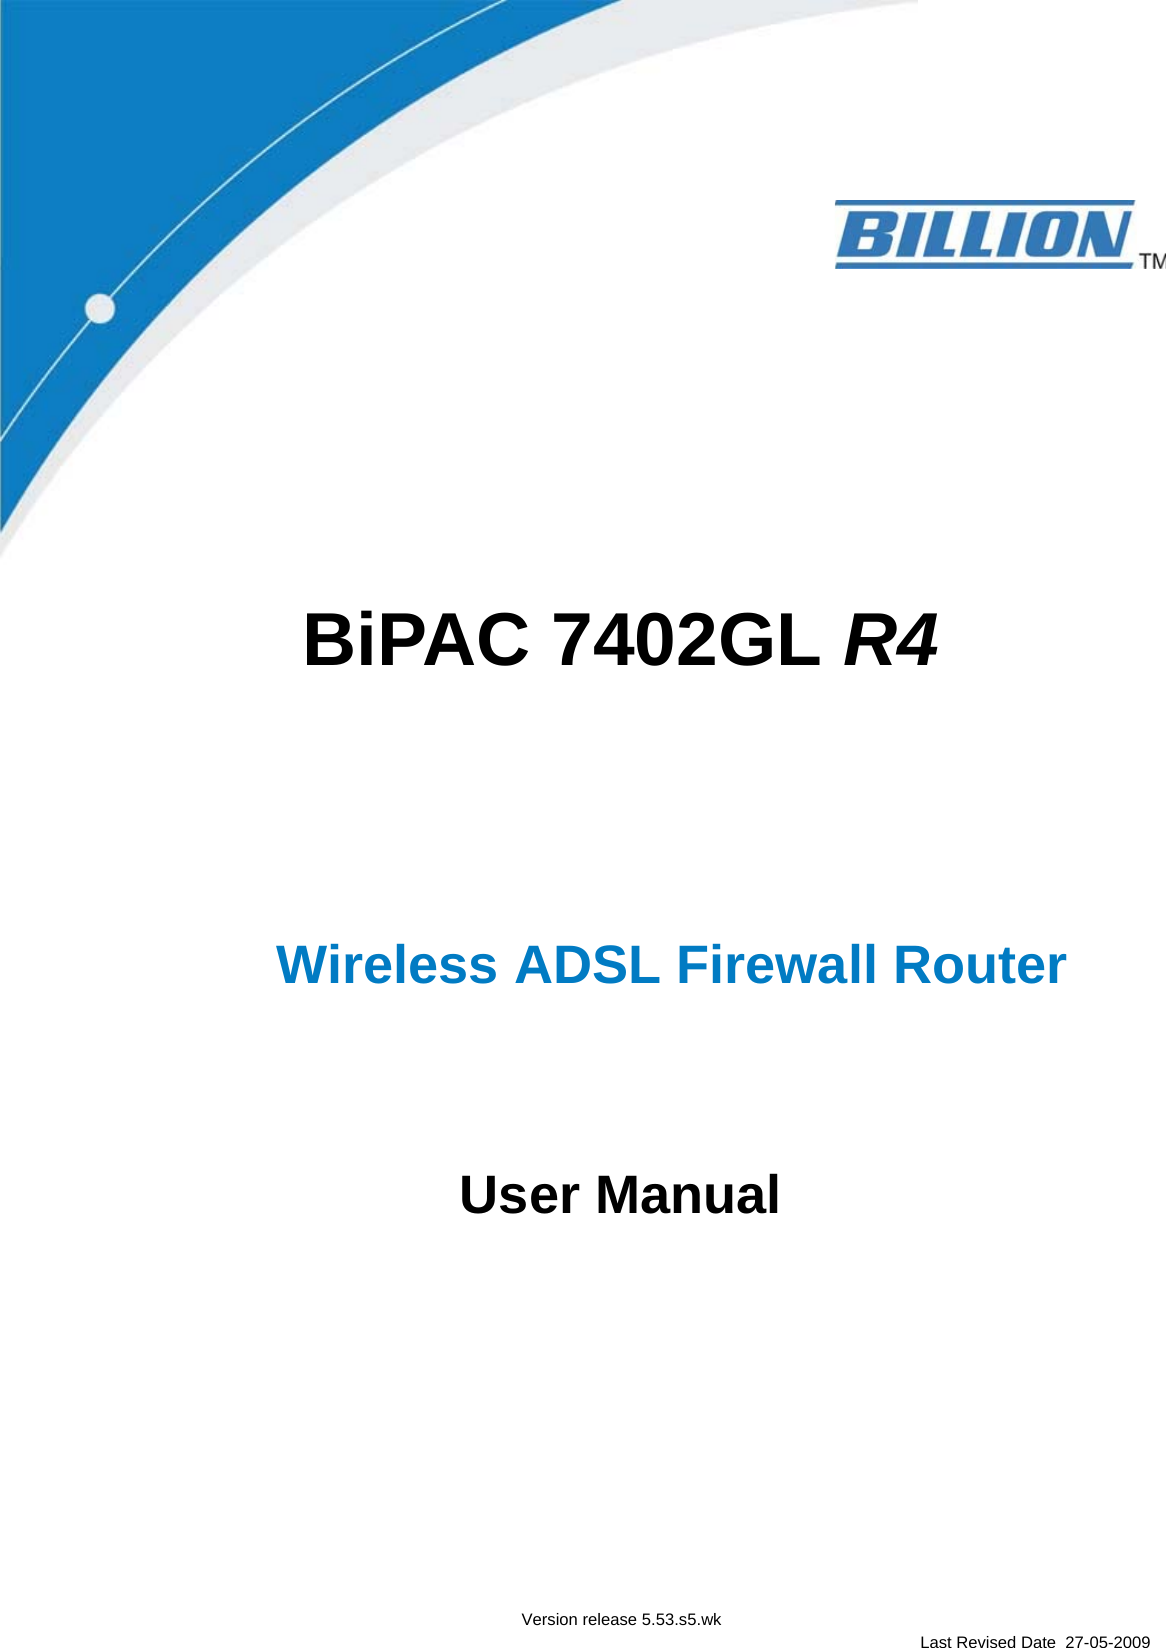                      BiPAC 7402GL R4        Wireless ADSL Firewall Router         User Manual                    Version release 5.53.s5.wk   Last Revised Date  27-05-2009 